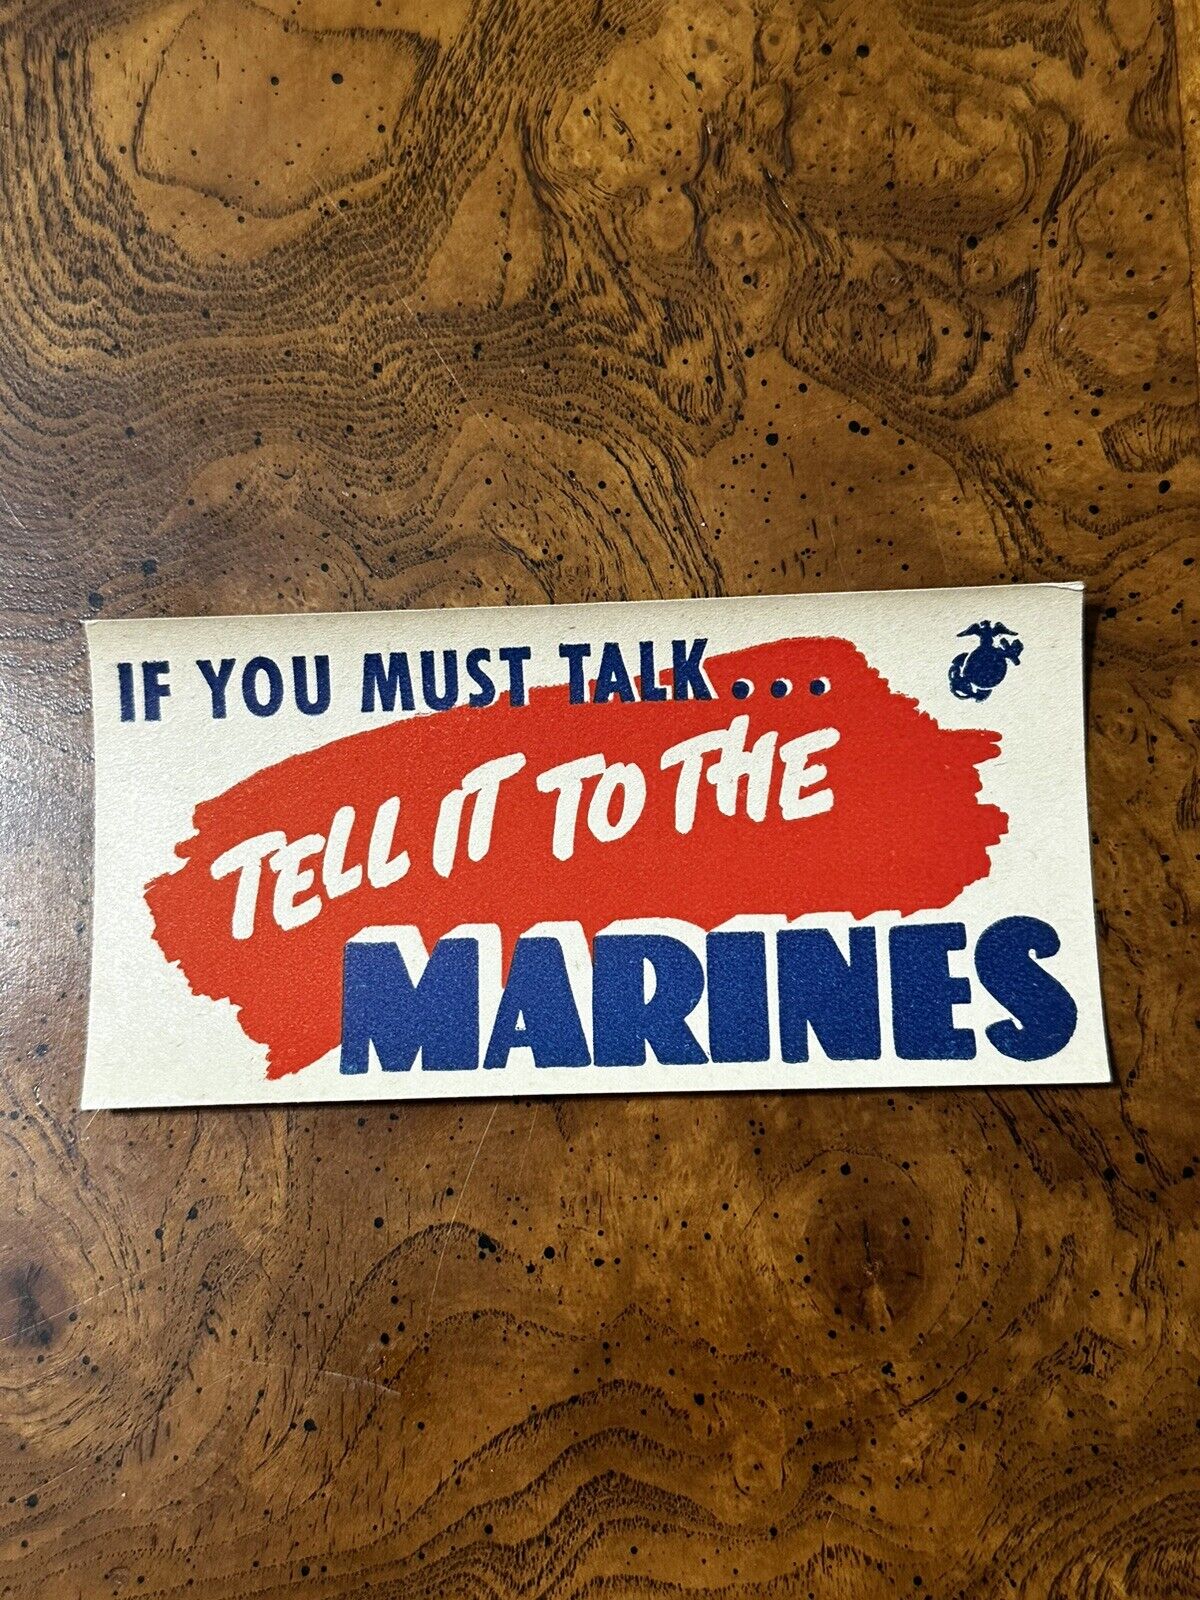 1940s WWII Marine Corps Window Decal - “If You Must Talk Tell It To The Marines”